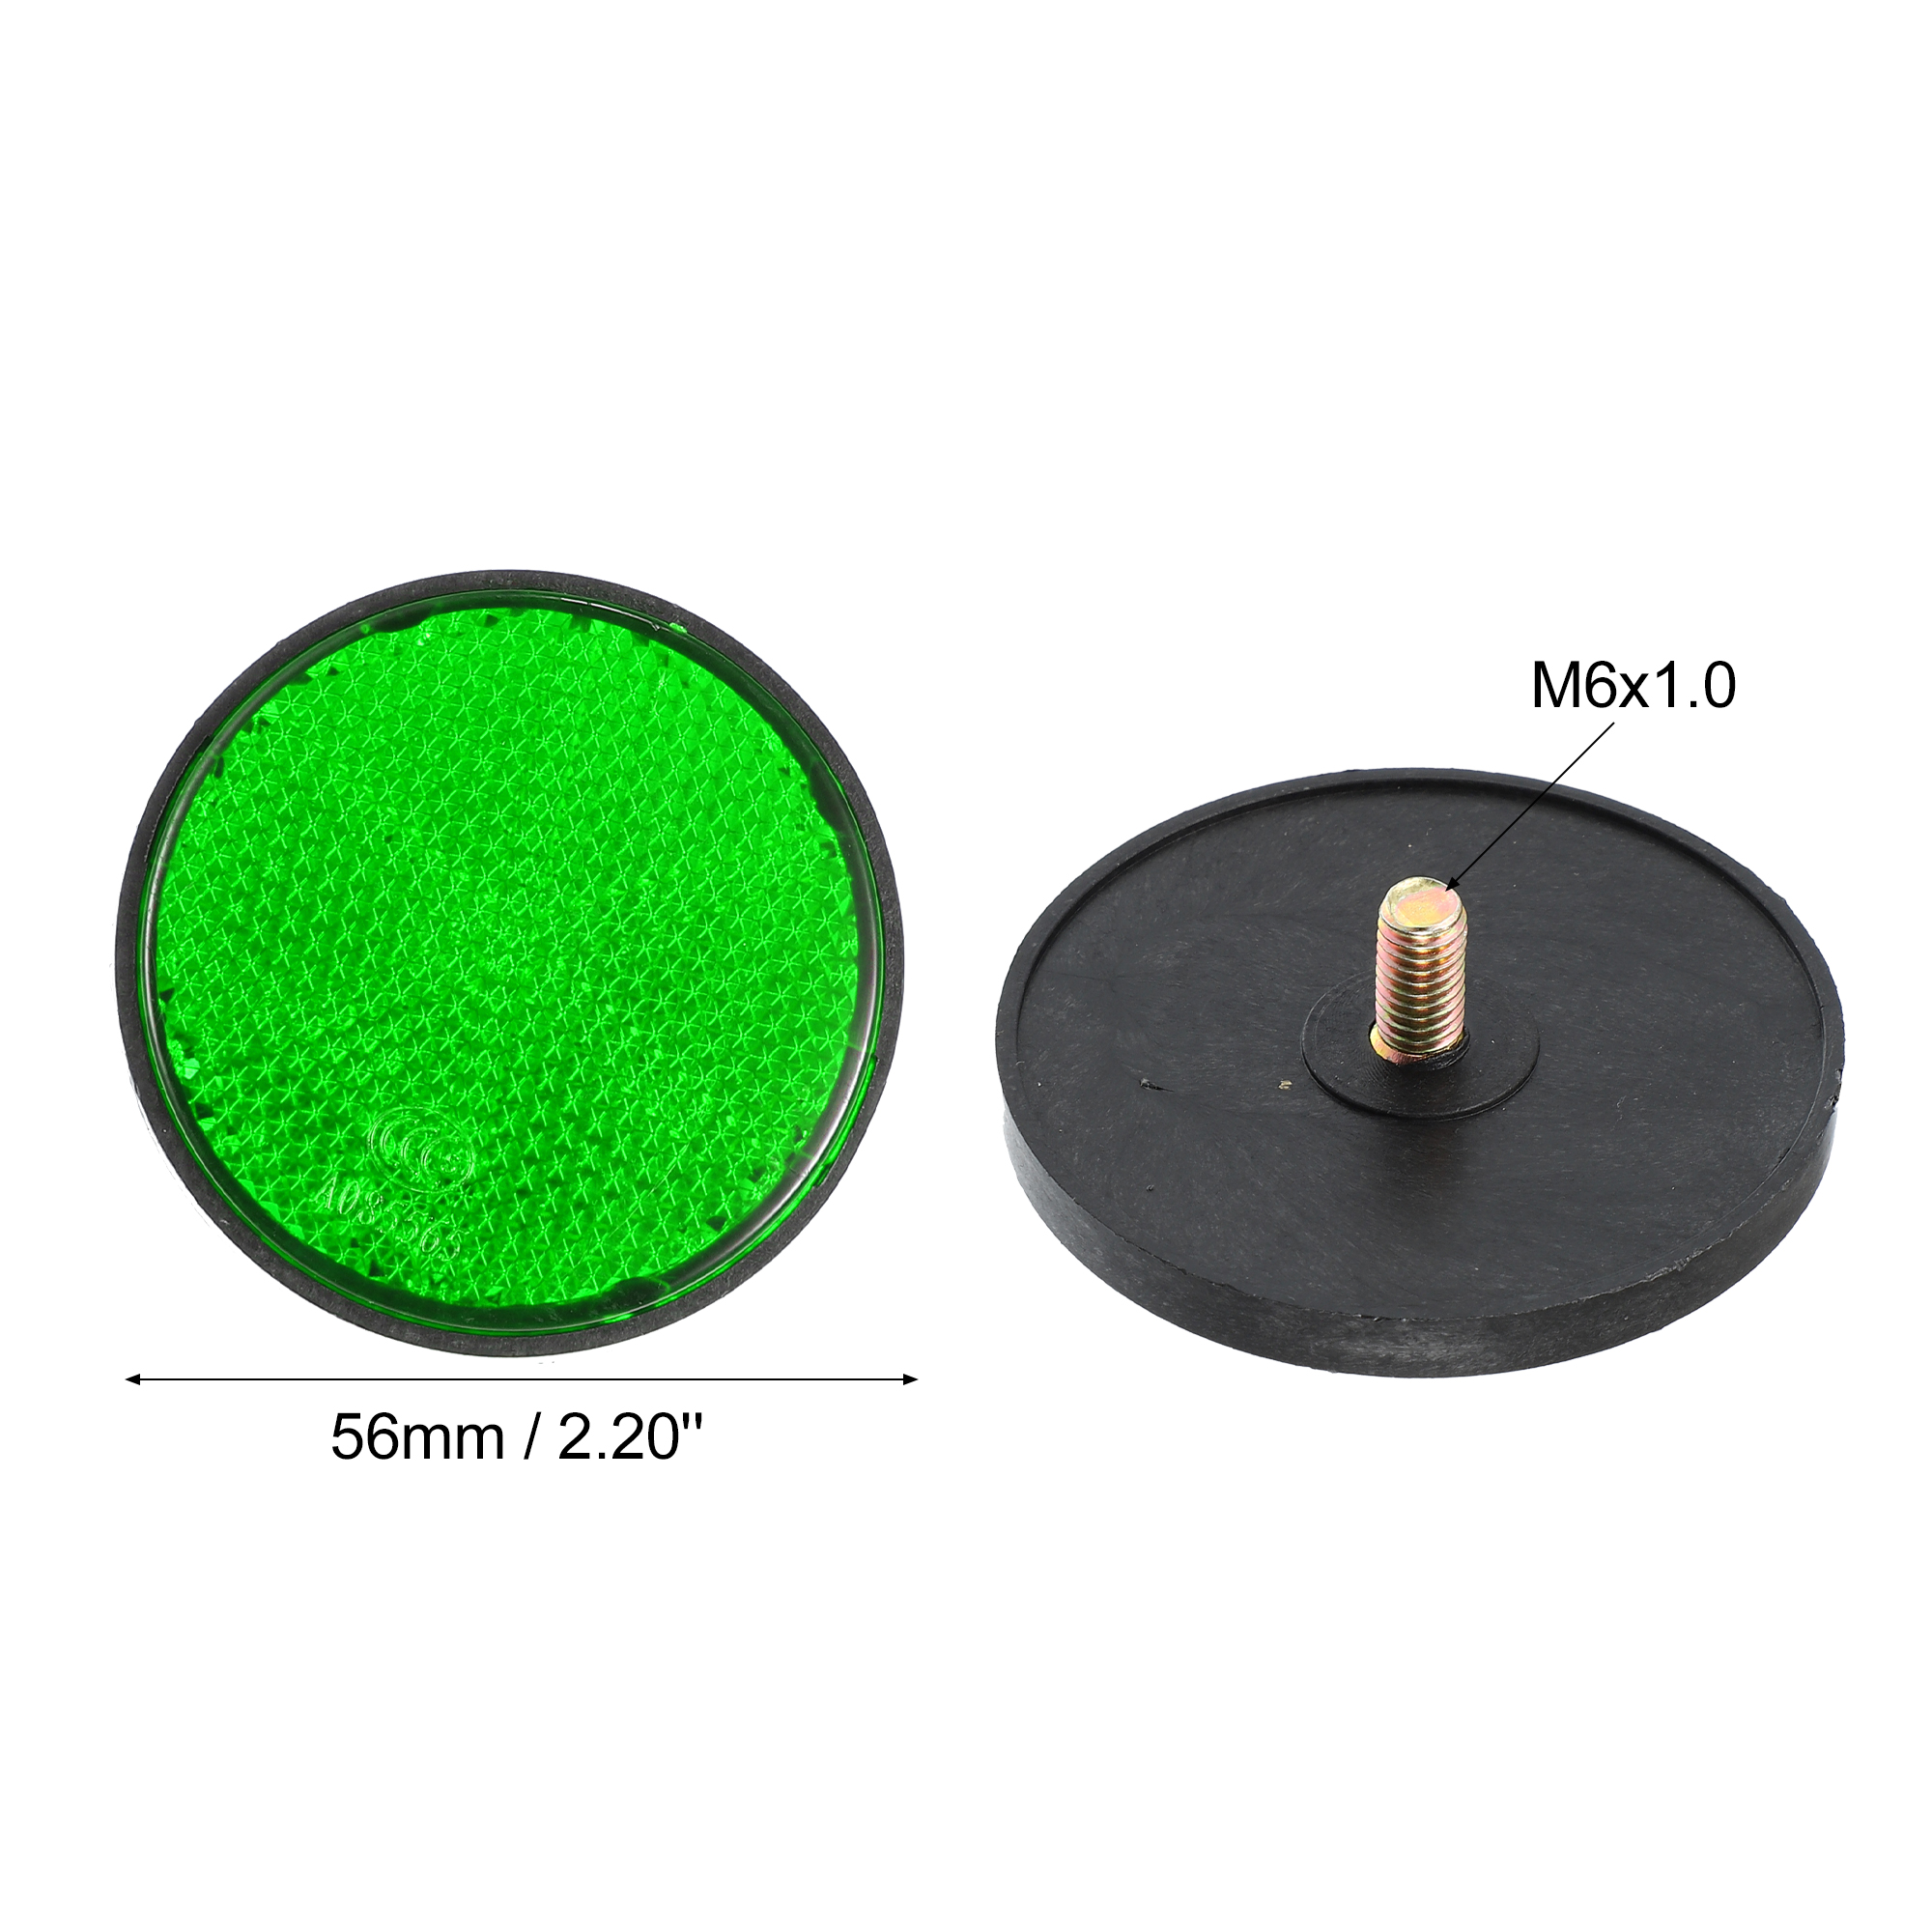 Unique Bargains 6pcs M6x1.0 Green Universal Screw Mount Round Warning Reflector for Motorcycle